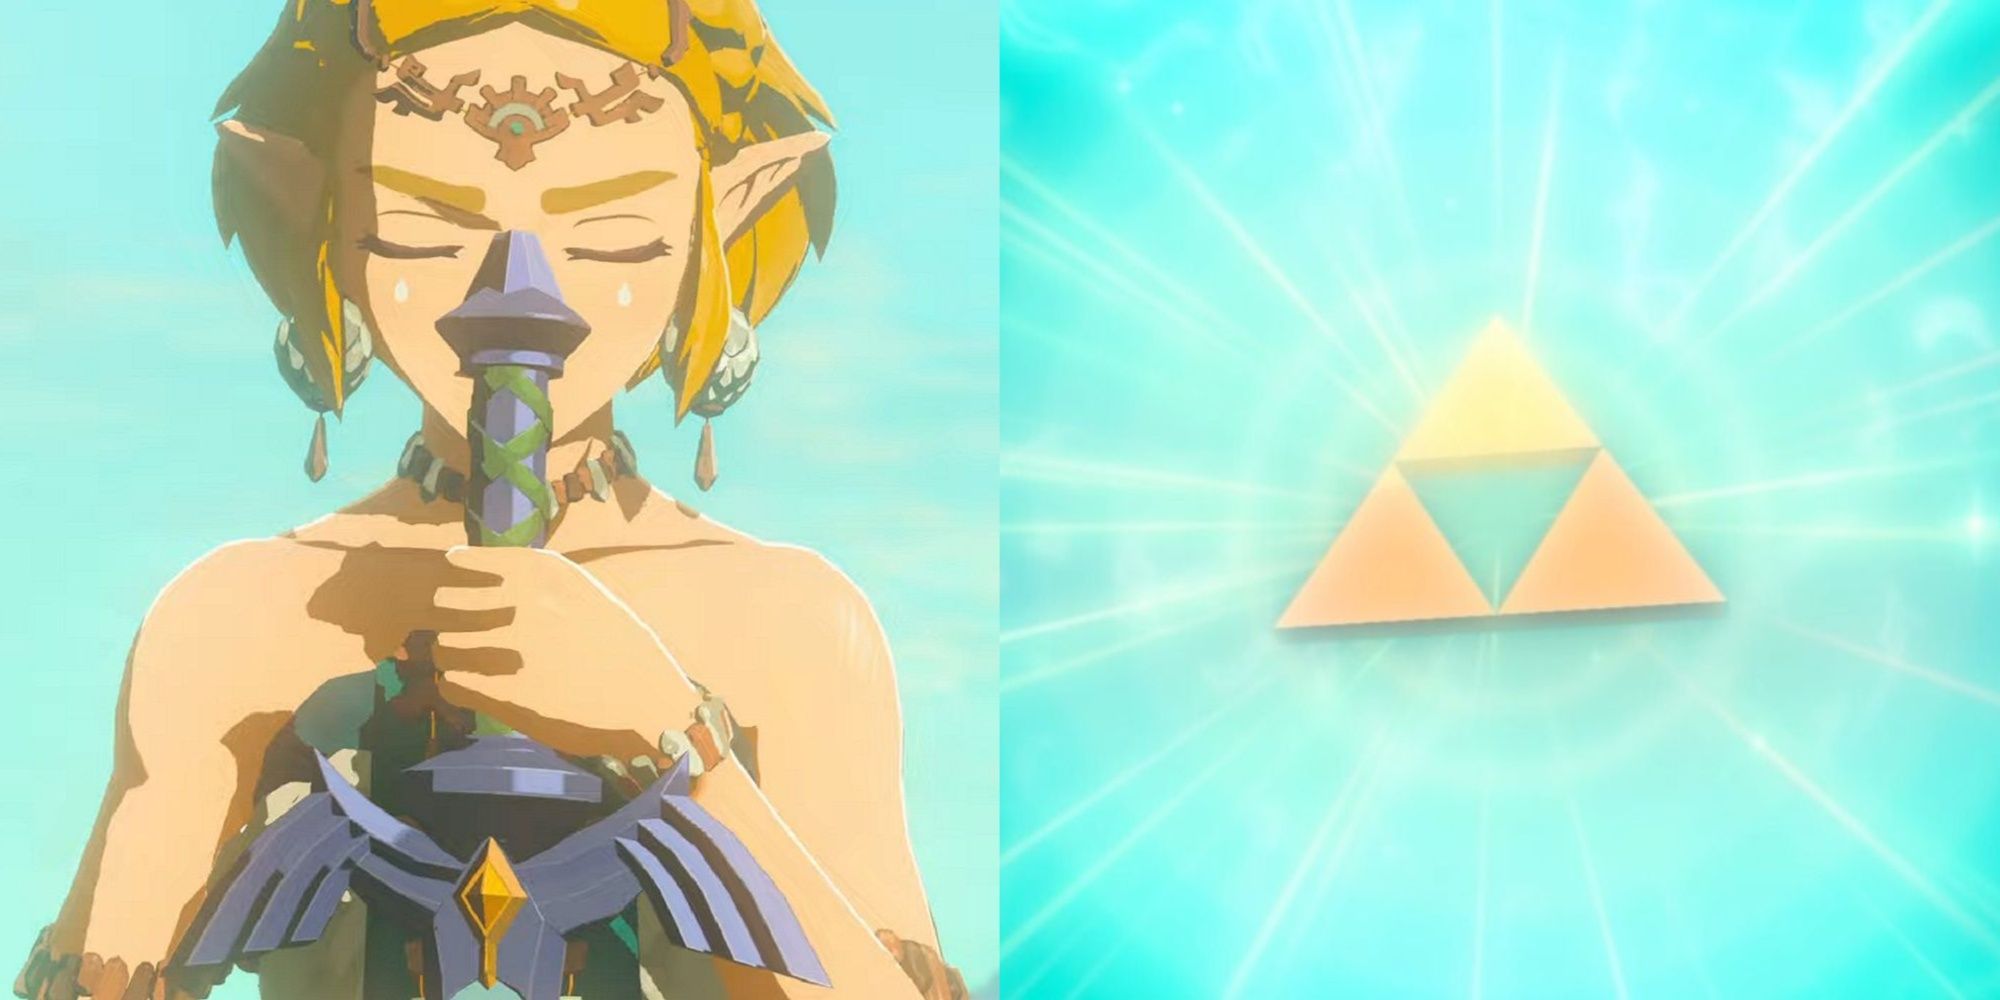 Zelda in Zonai clothing holding the Master Sword to the right, and the Triforce surround by blue rays of light to the right